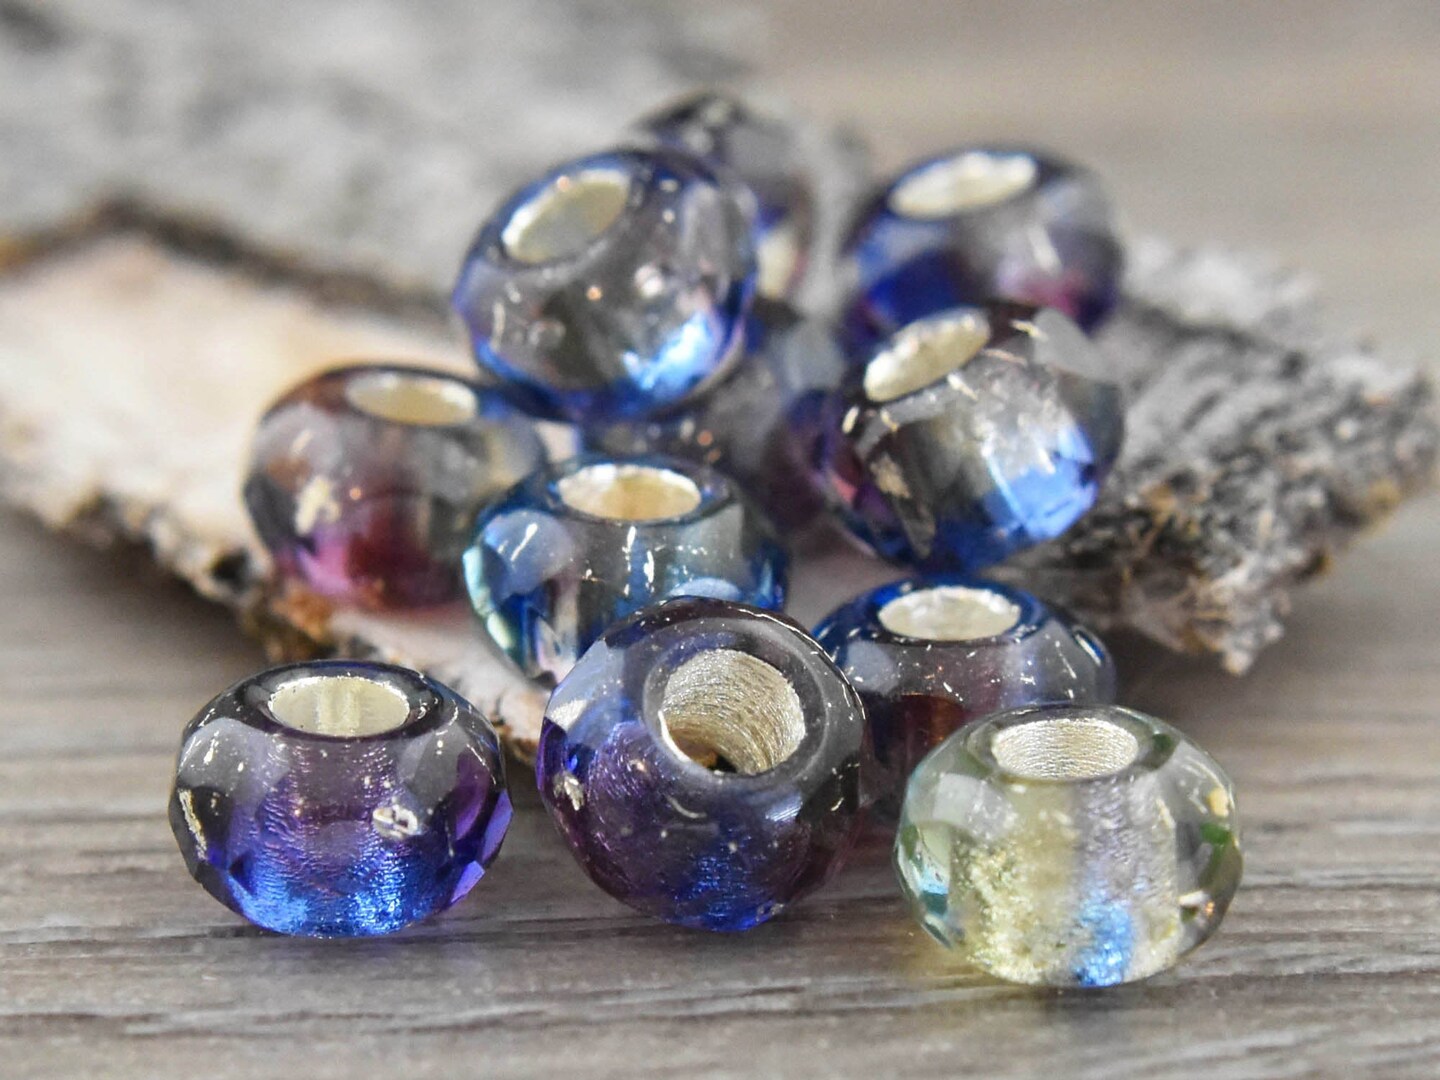 *25* 5x8mm Silver Lined Sapphire/Jonquil/Amethyst Faceted Large Hole Rondelle Roller Beads